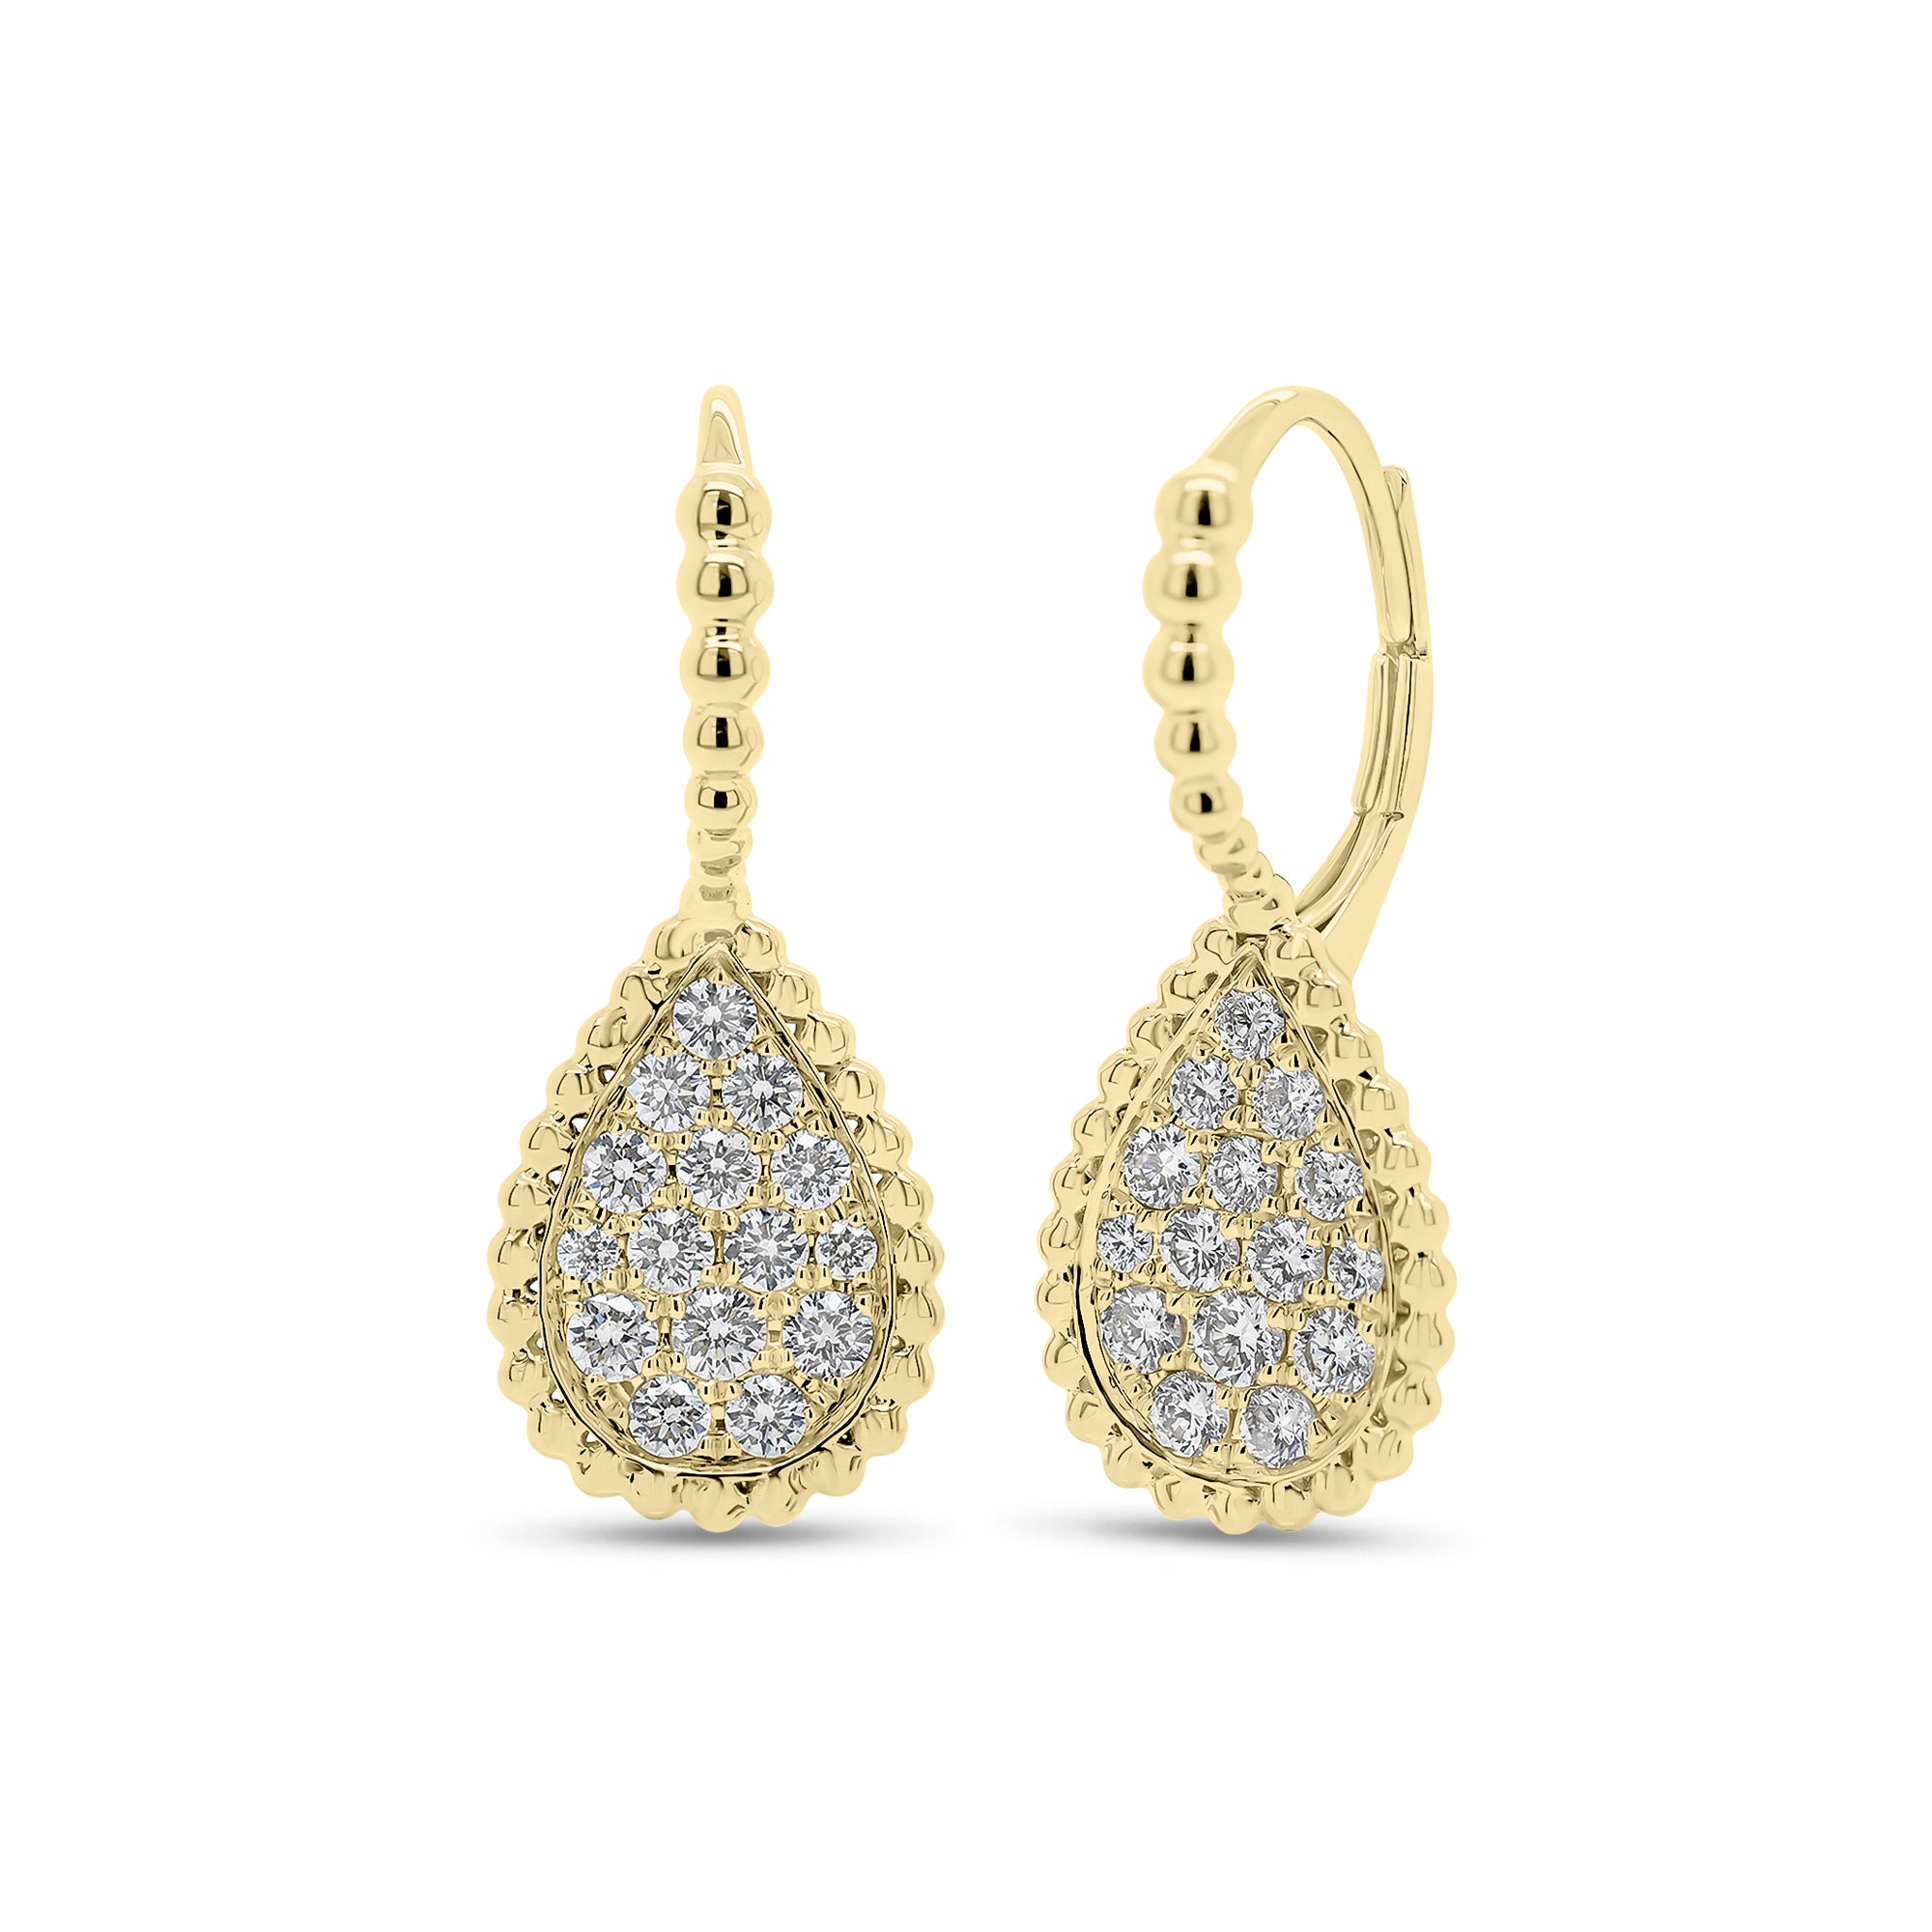 Diamond Pear Drop Lever-Back Earrings - 14K gold weighing 2.93 grams  - 30 round diamonds weighing 0.65 carats